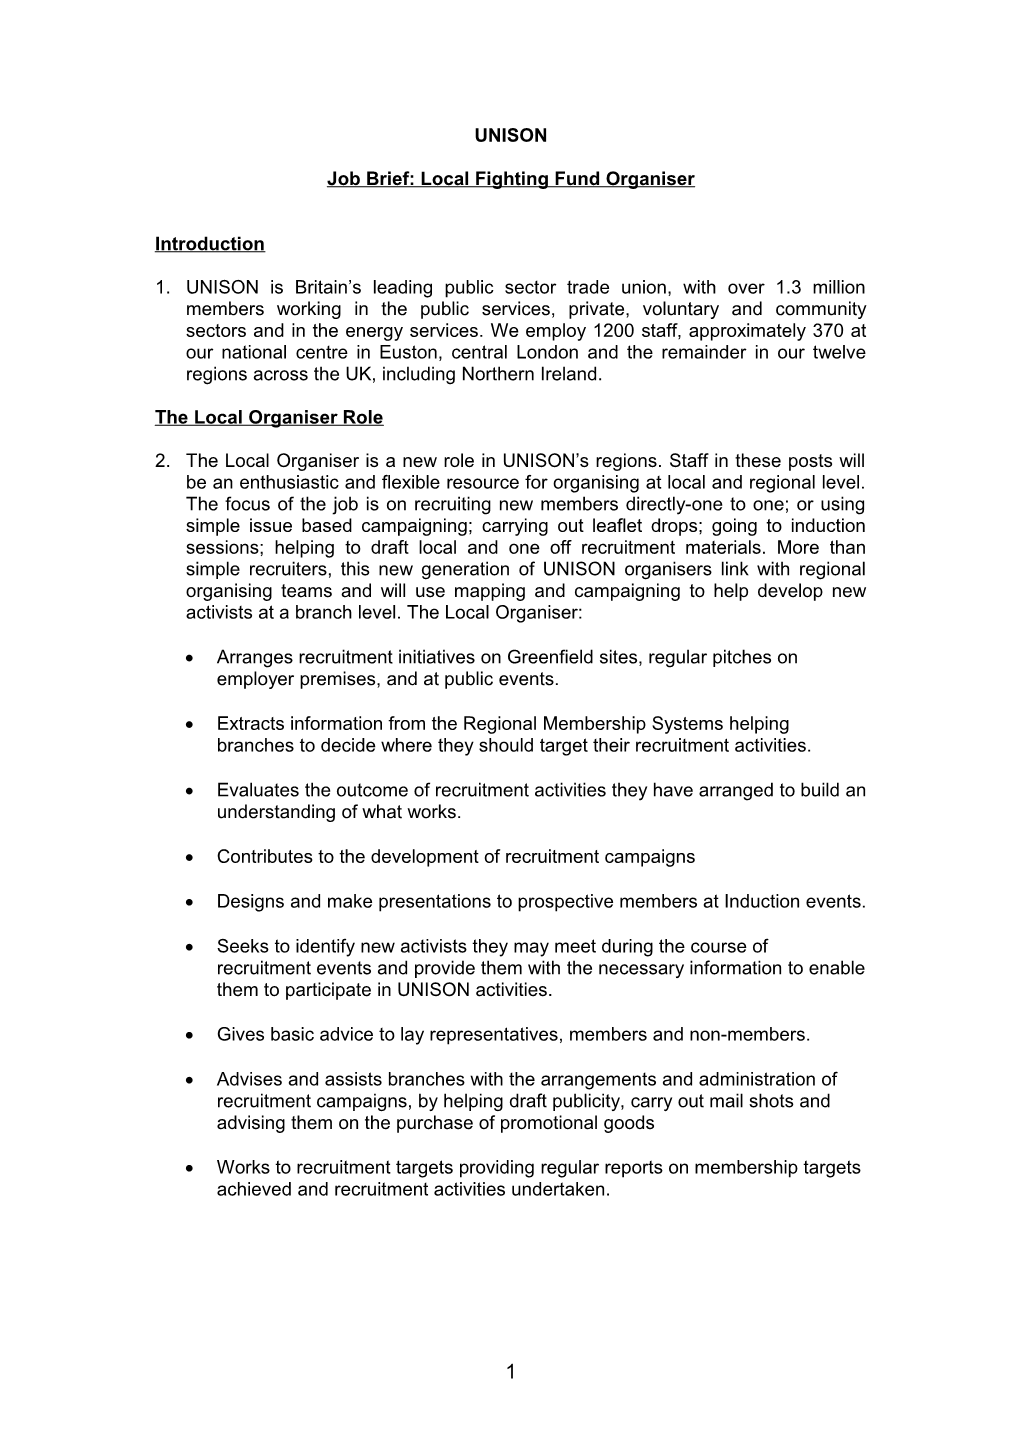 Job Brief JD and Person Spec - Local Fighting Fund Organiser- South East Region - May 2014